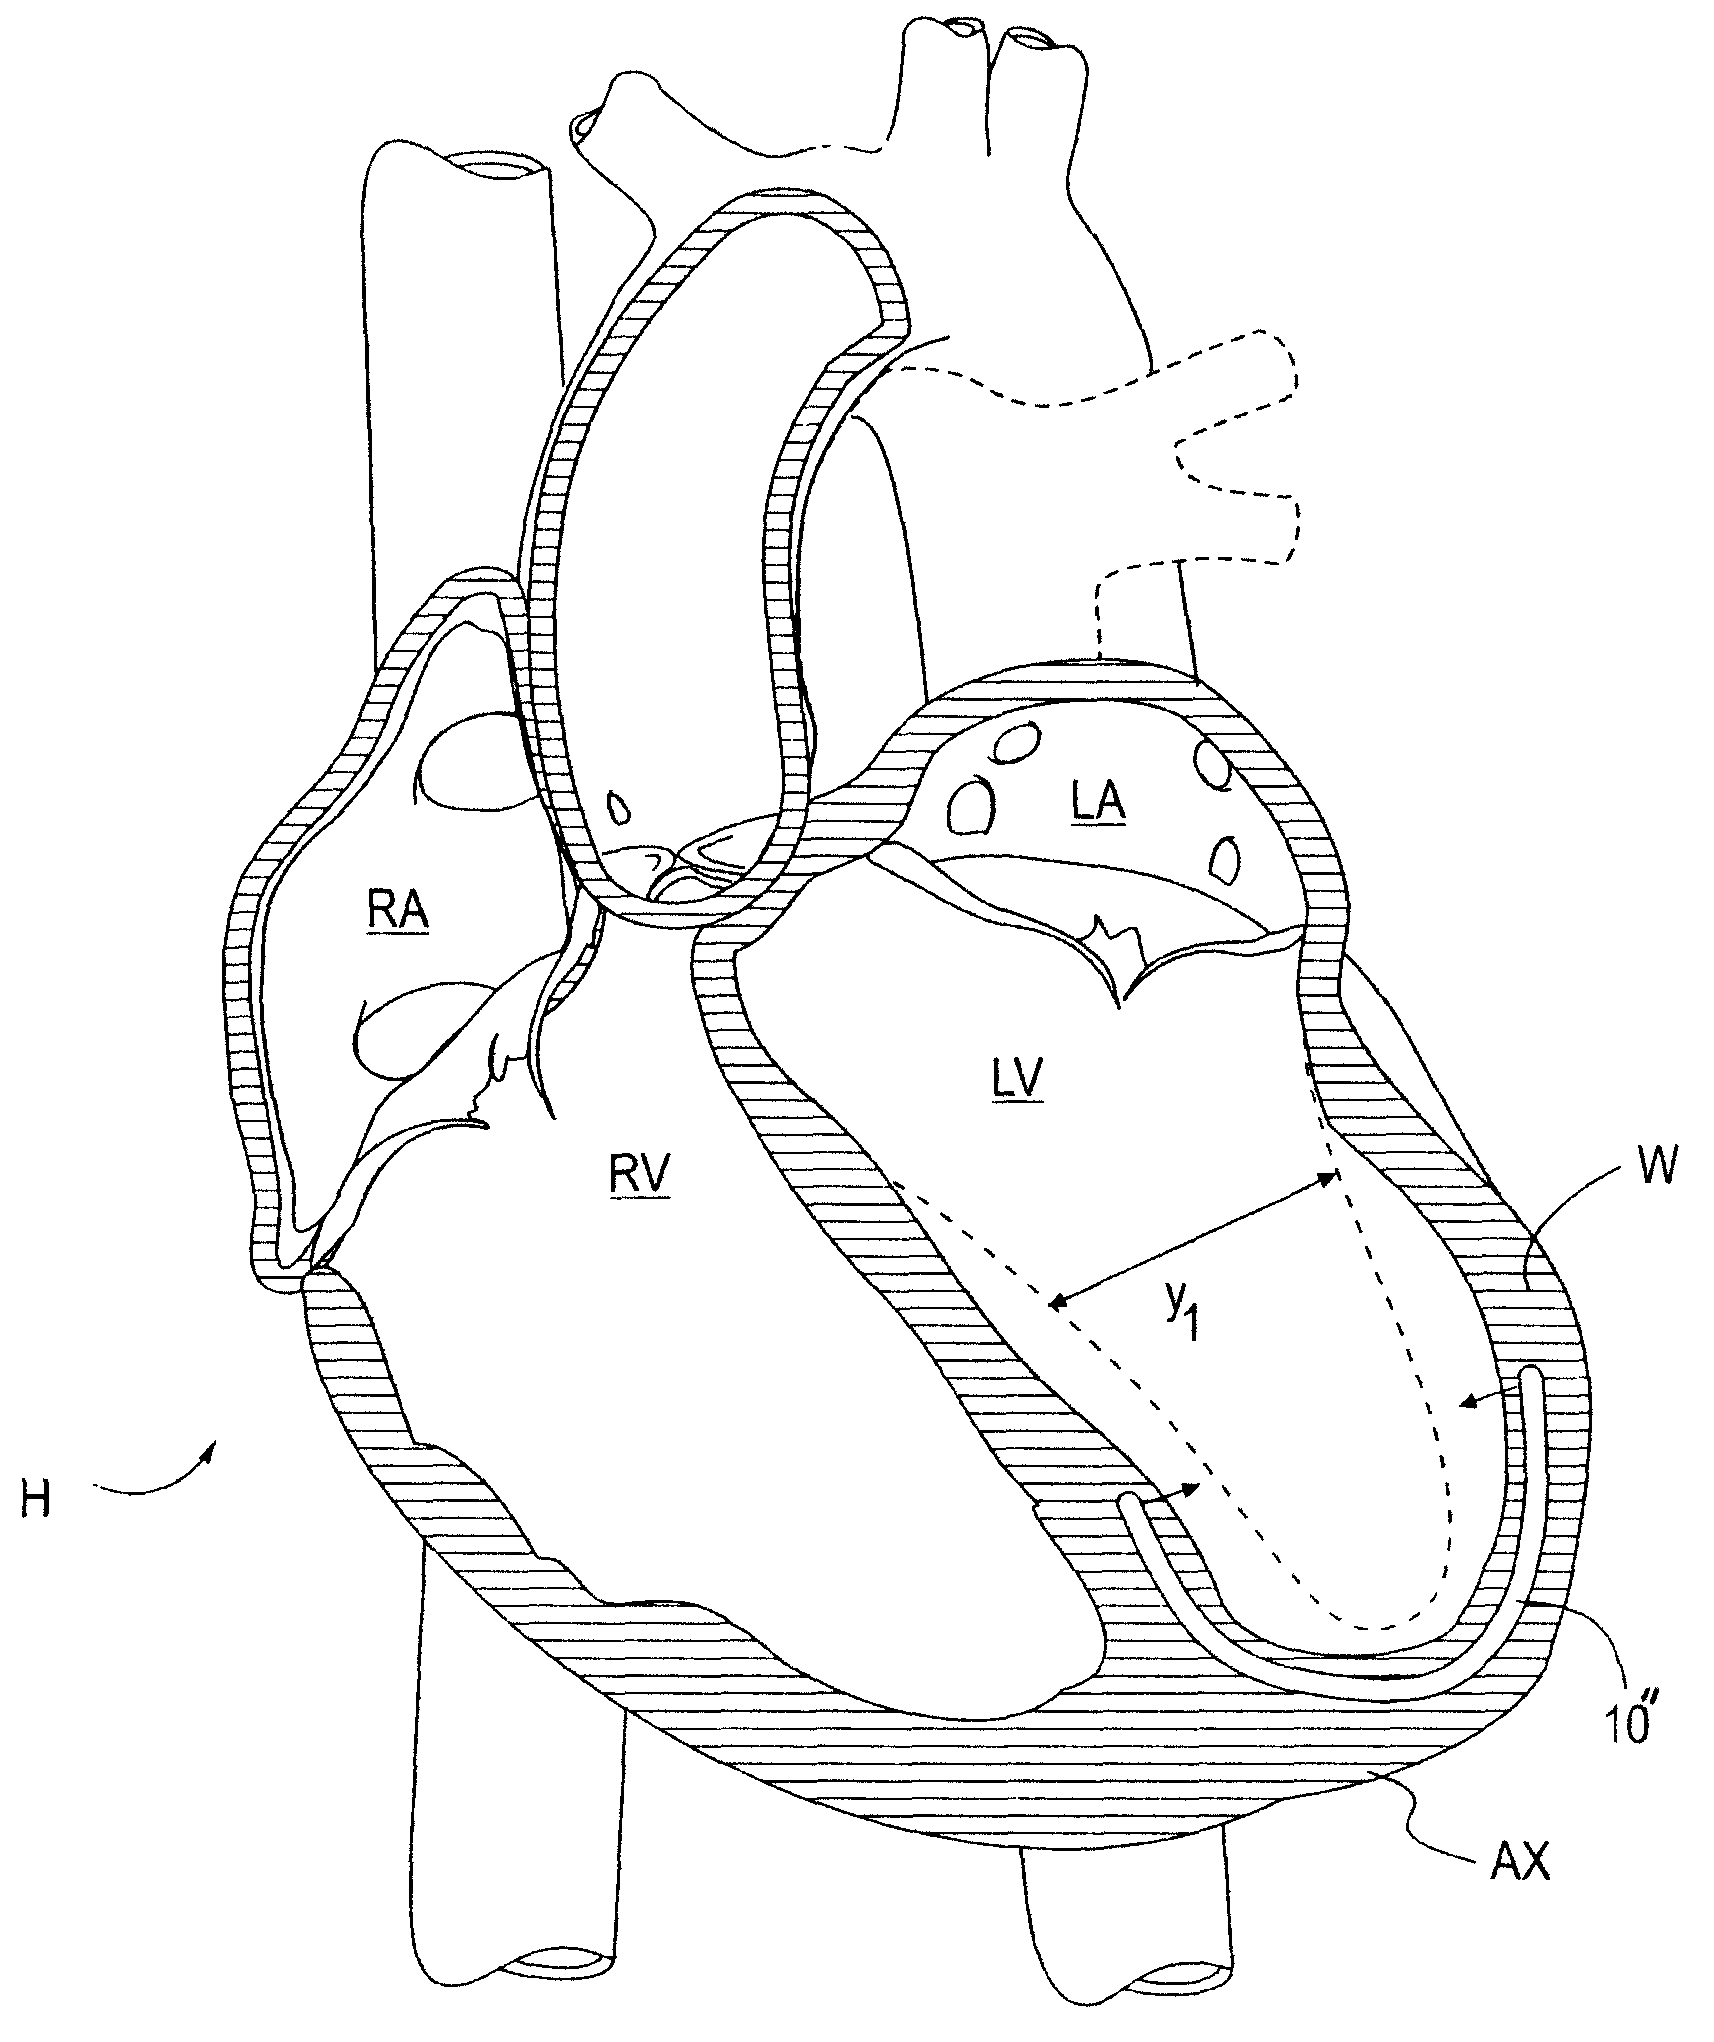 Methods and systems for cardiac remodeling via resynchronization